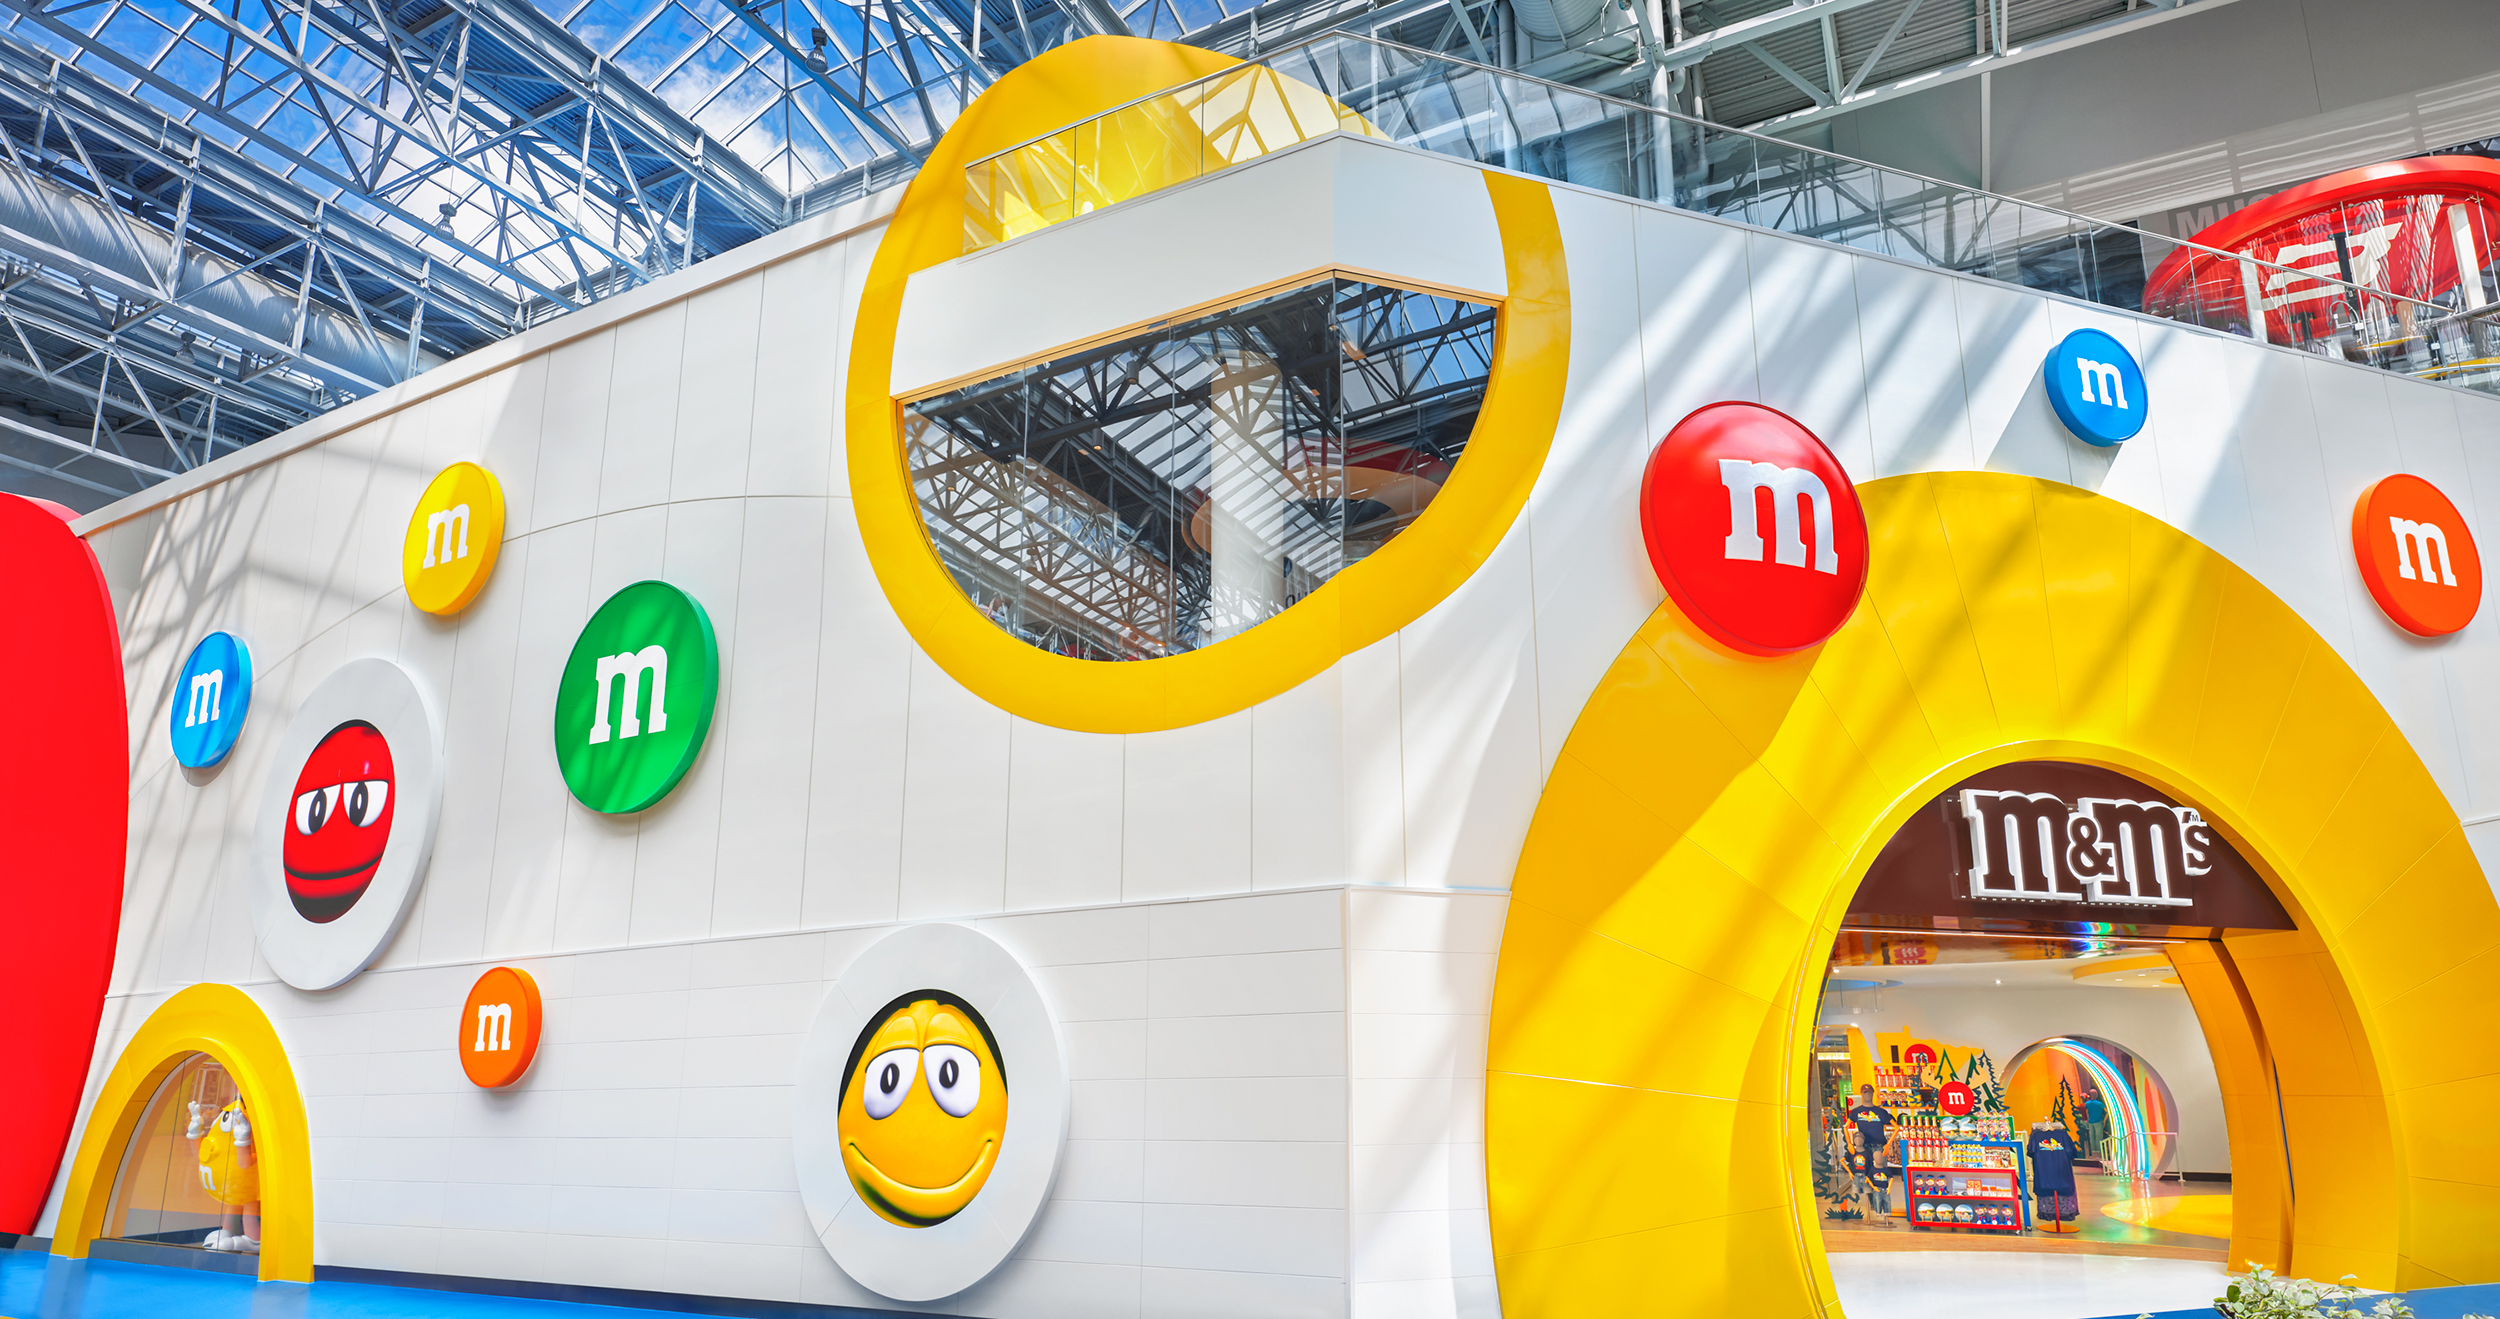 M&M's in Shop by Brand 